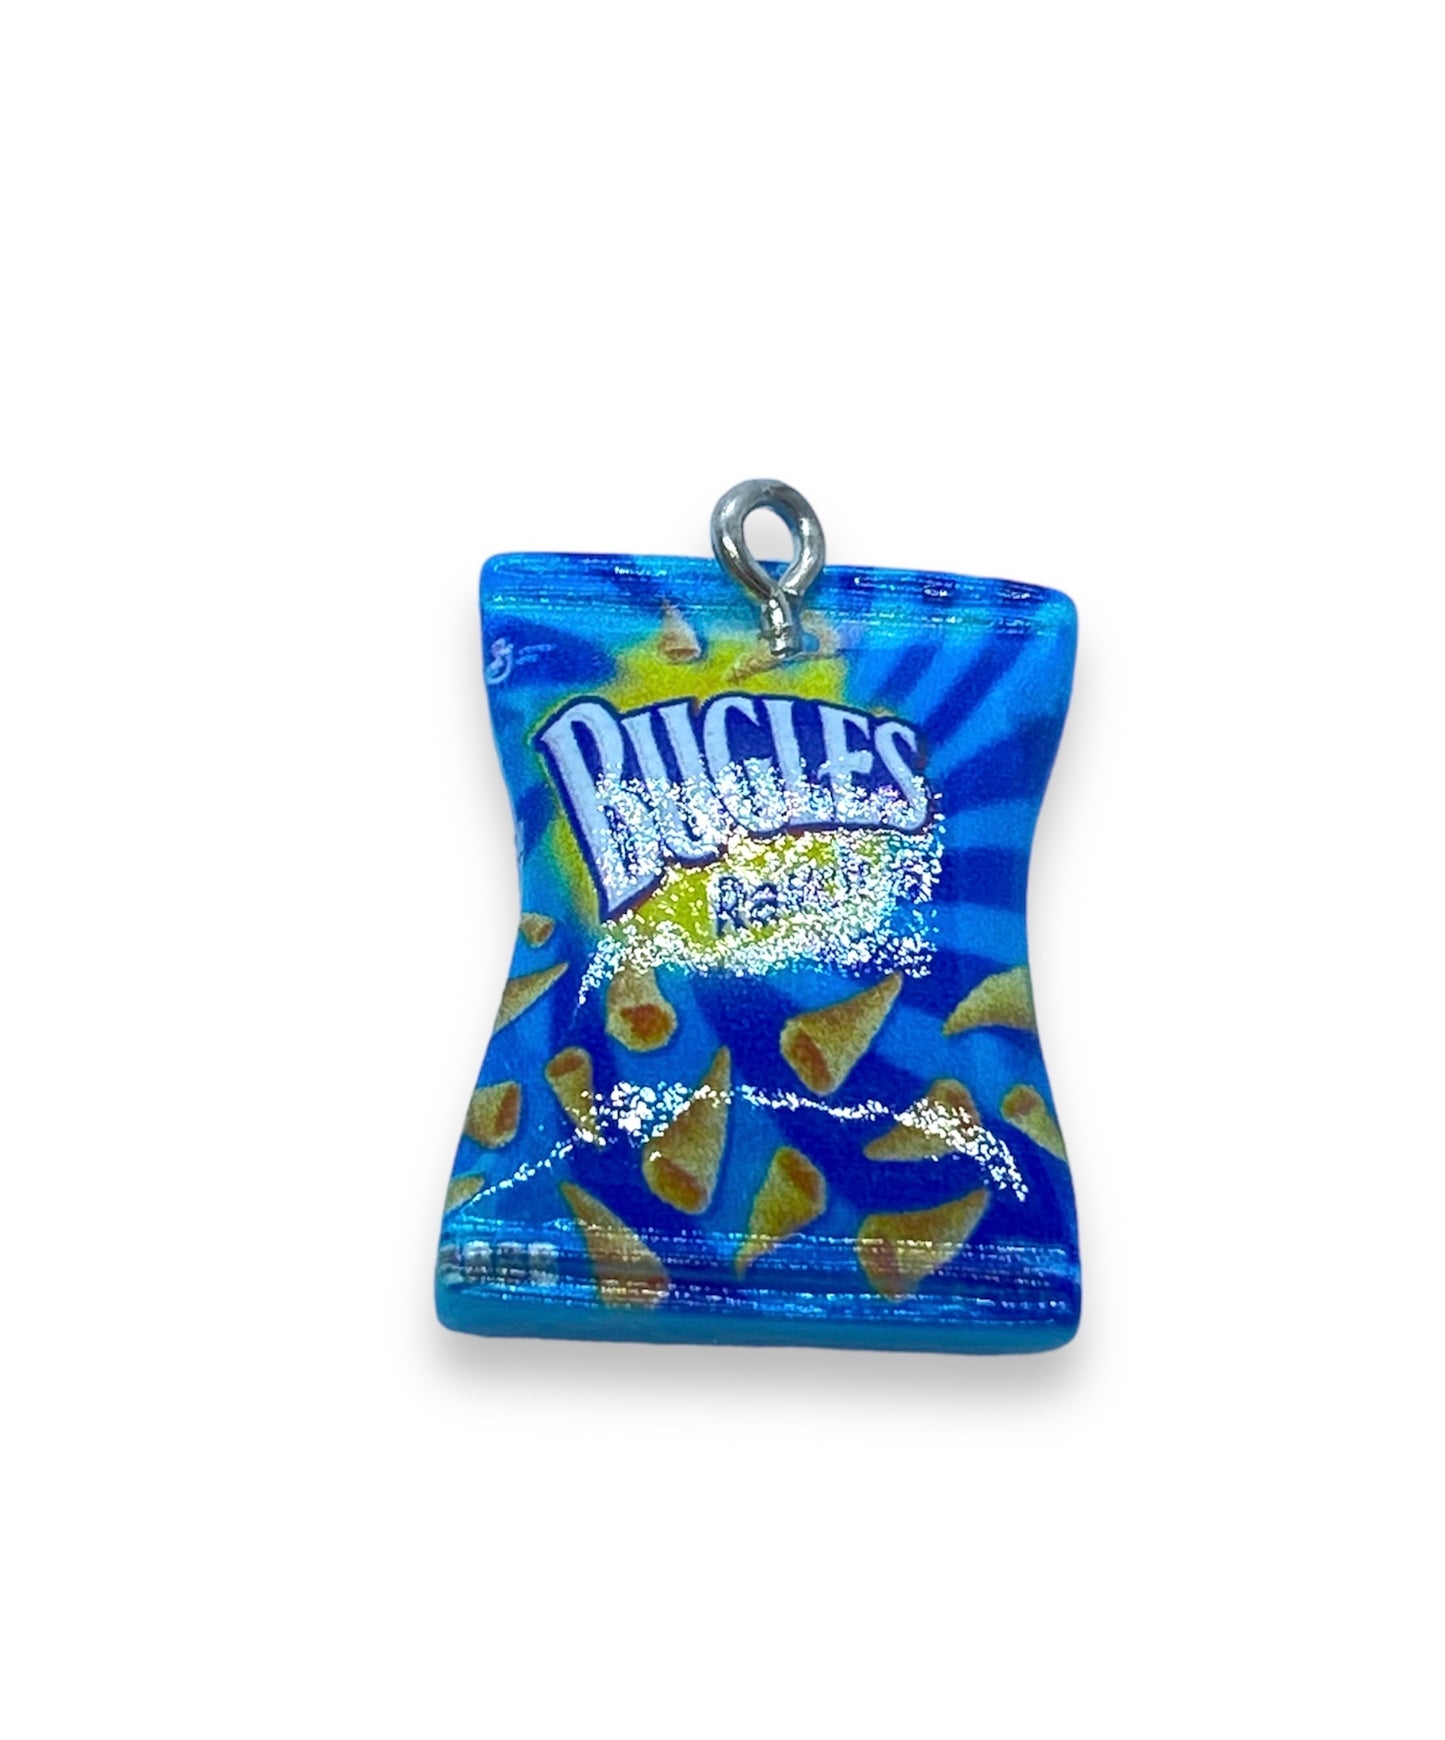 Chips Snack Charms